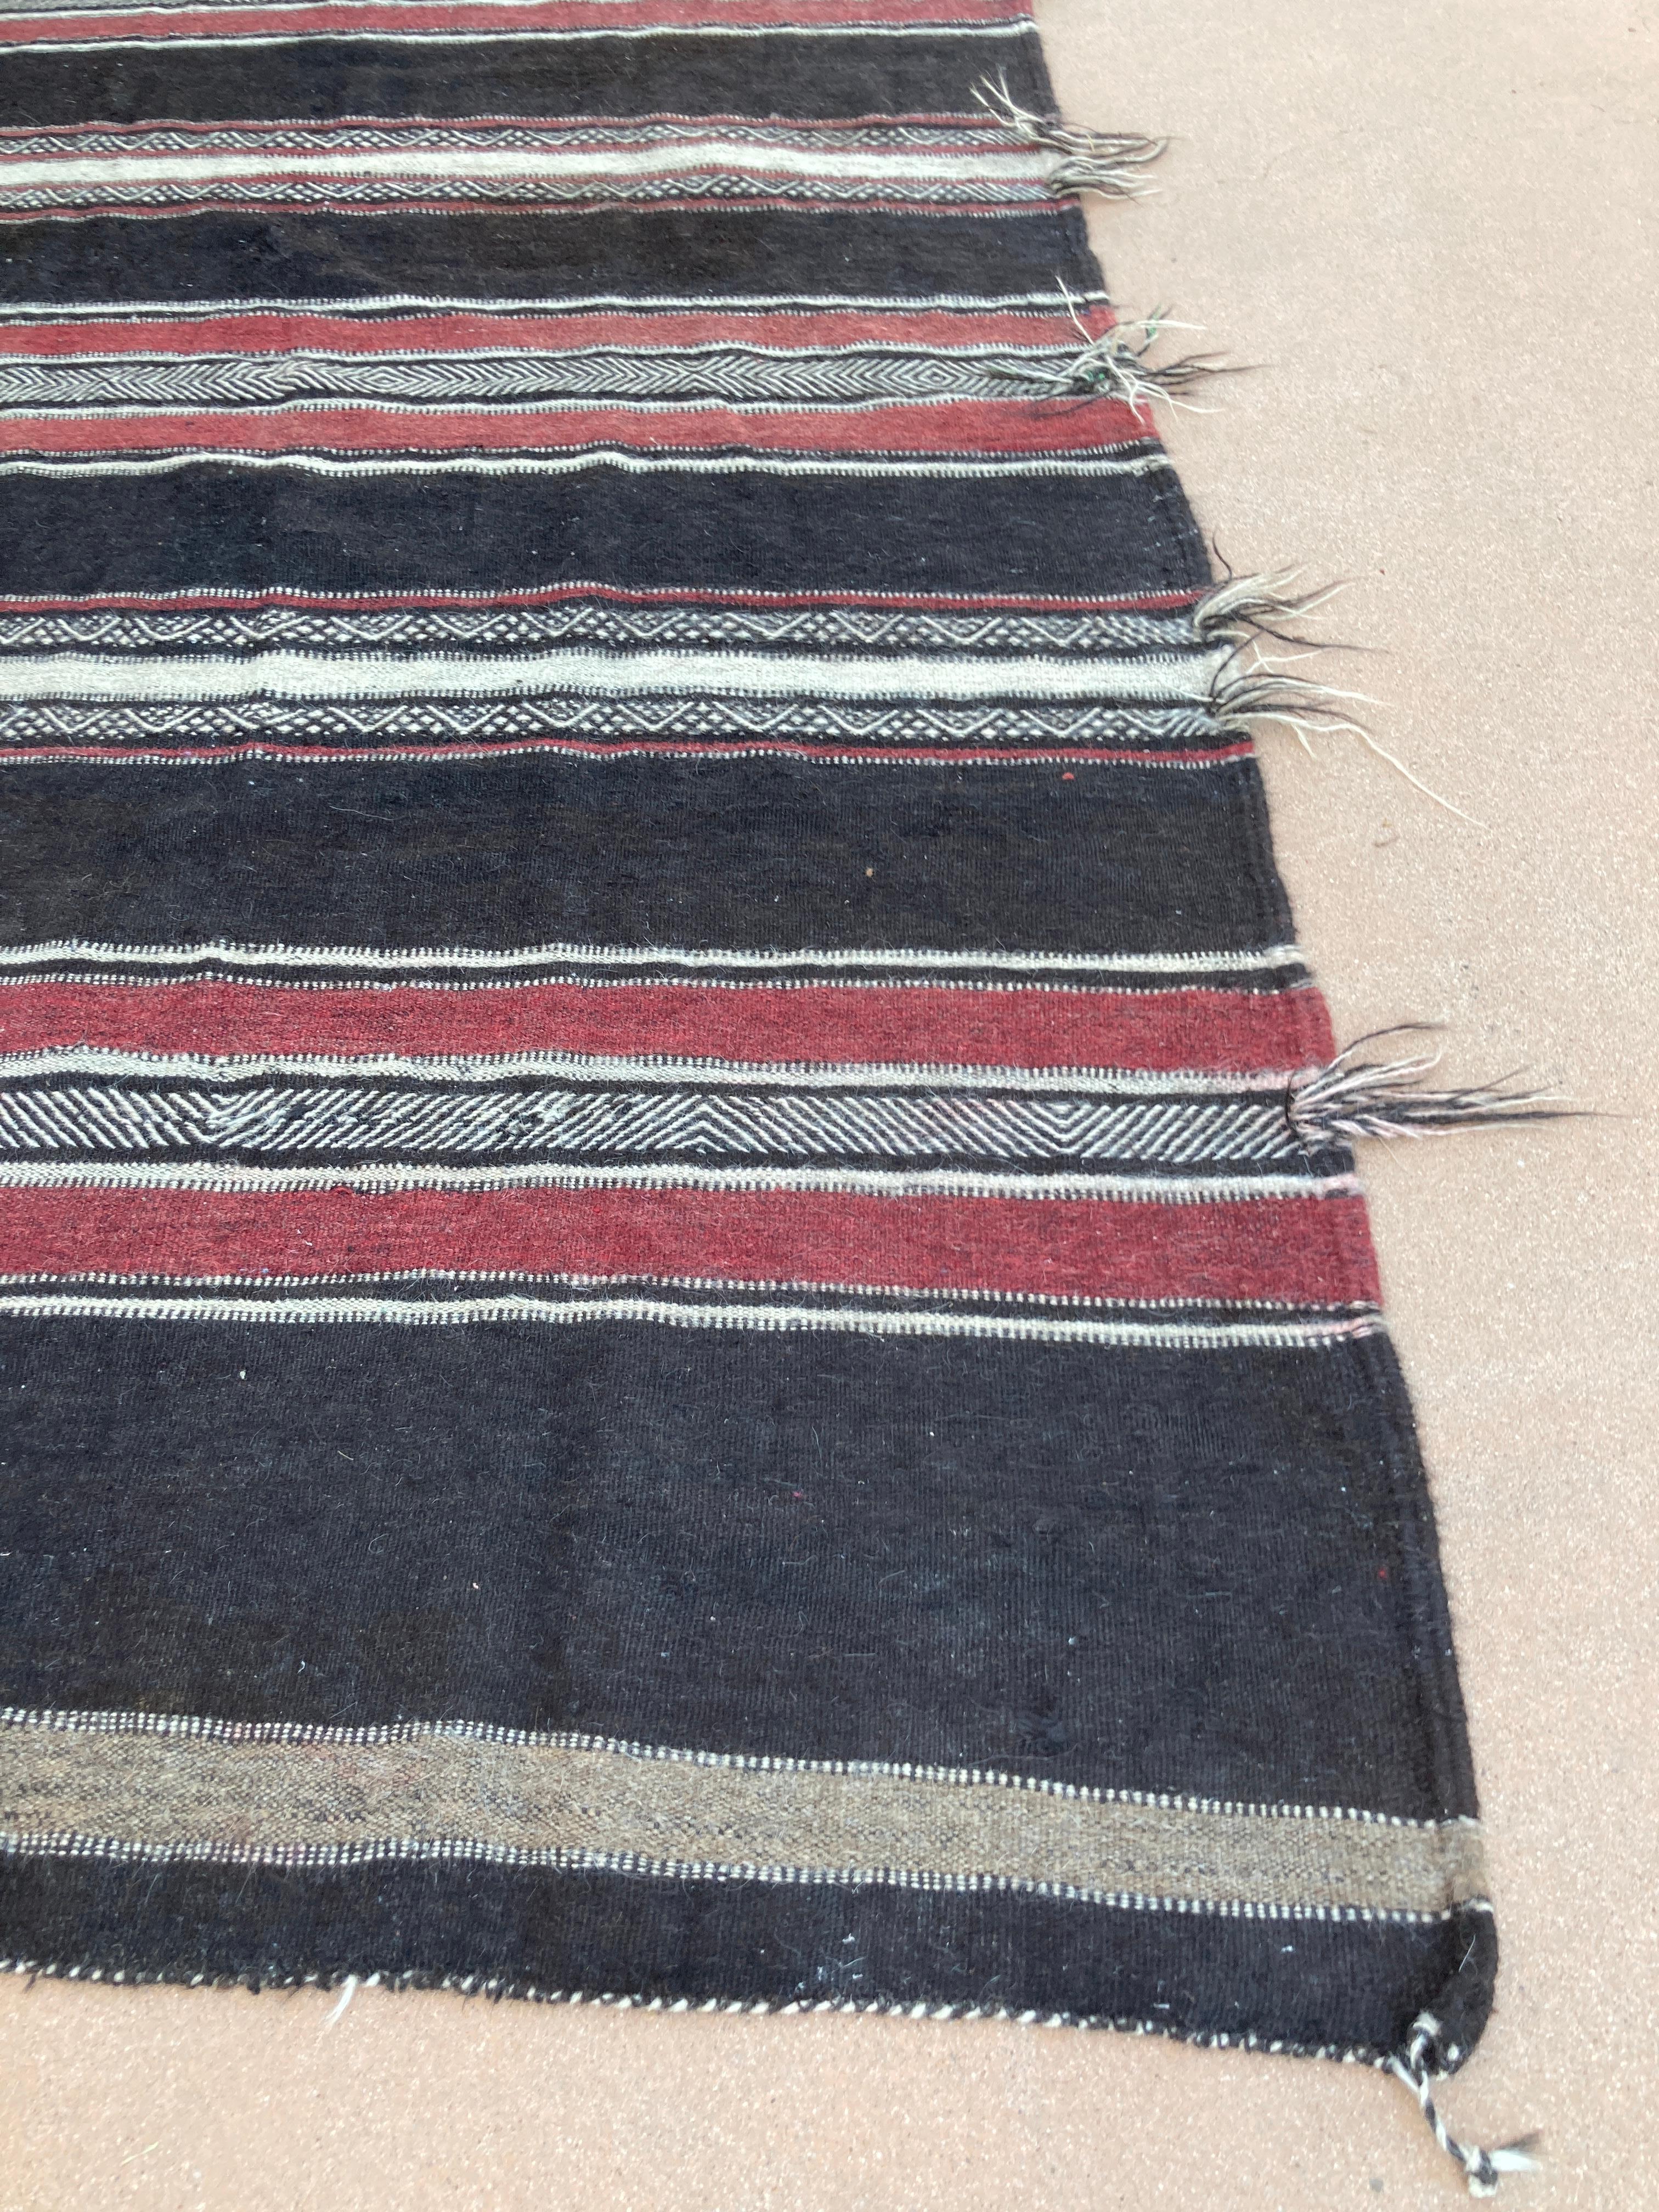 Moroccan Vintage Flat-Weave Black Camel Hair Tribal Rug In Good Condition For Sale In North Hollywood, CA